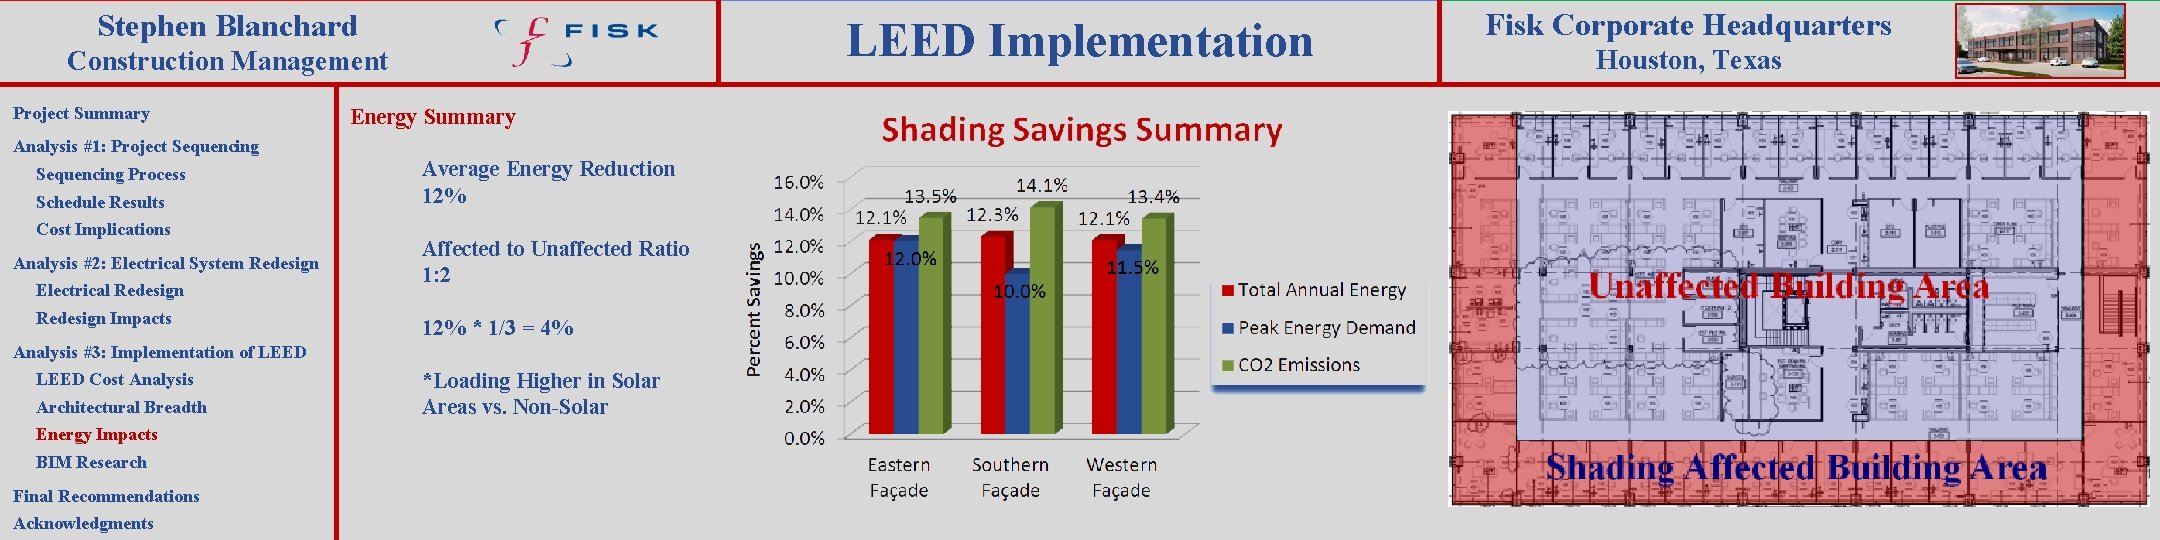 Stephen Blanchard LEED Implementation Construction Management Project Summary Energy Summary Analysis #1: Project Sequencing